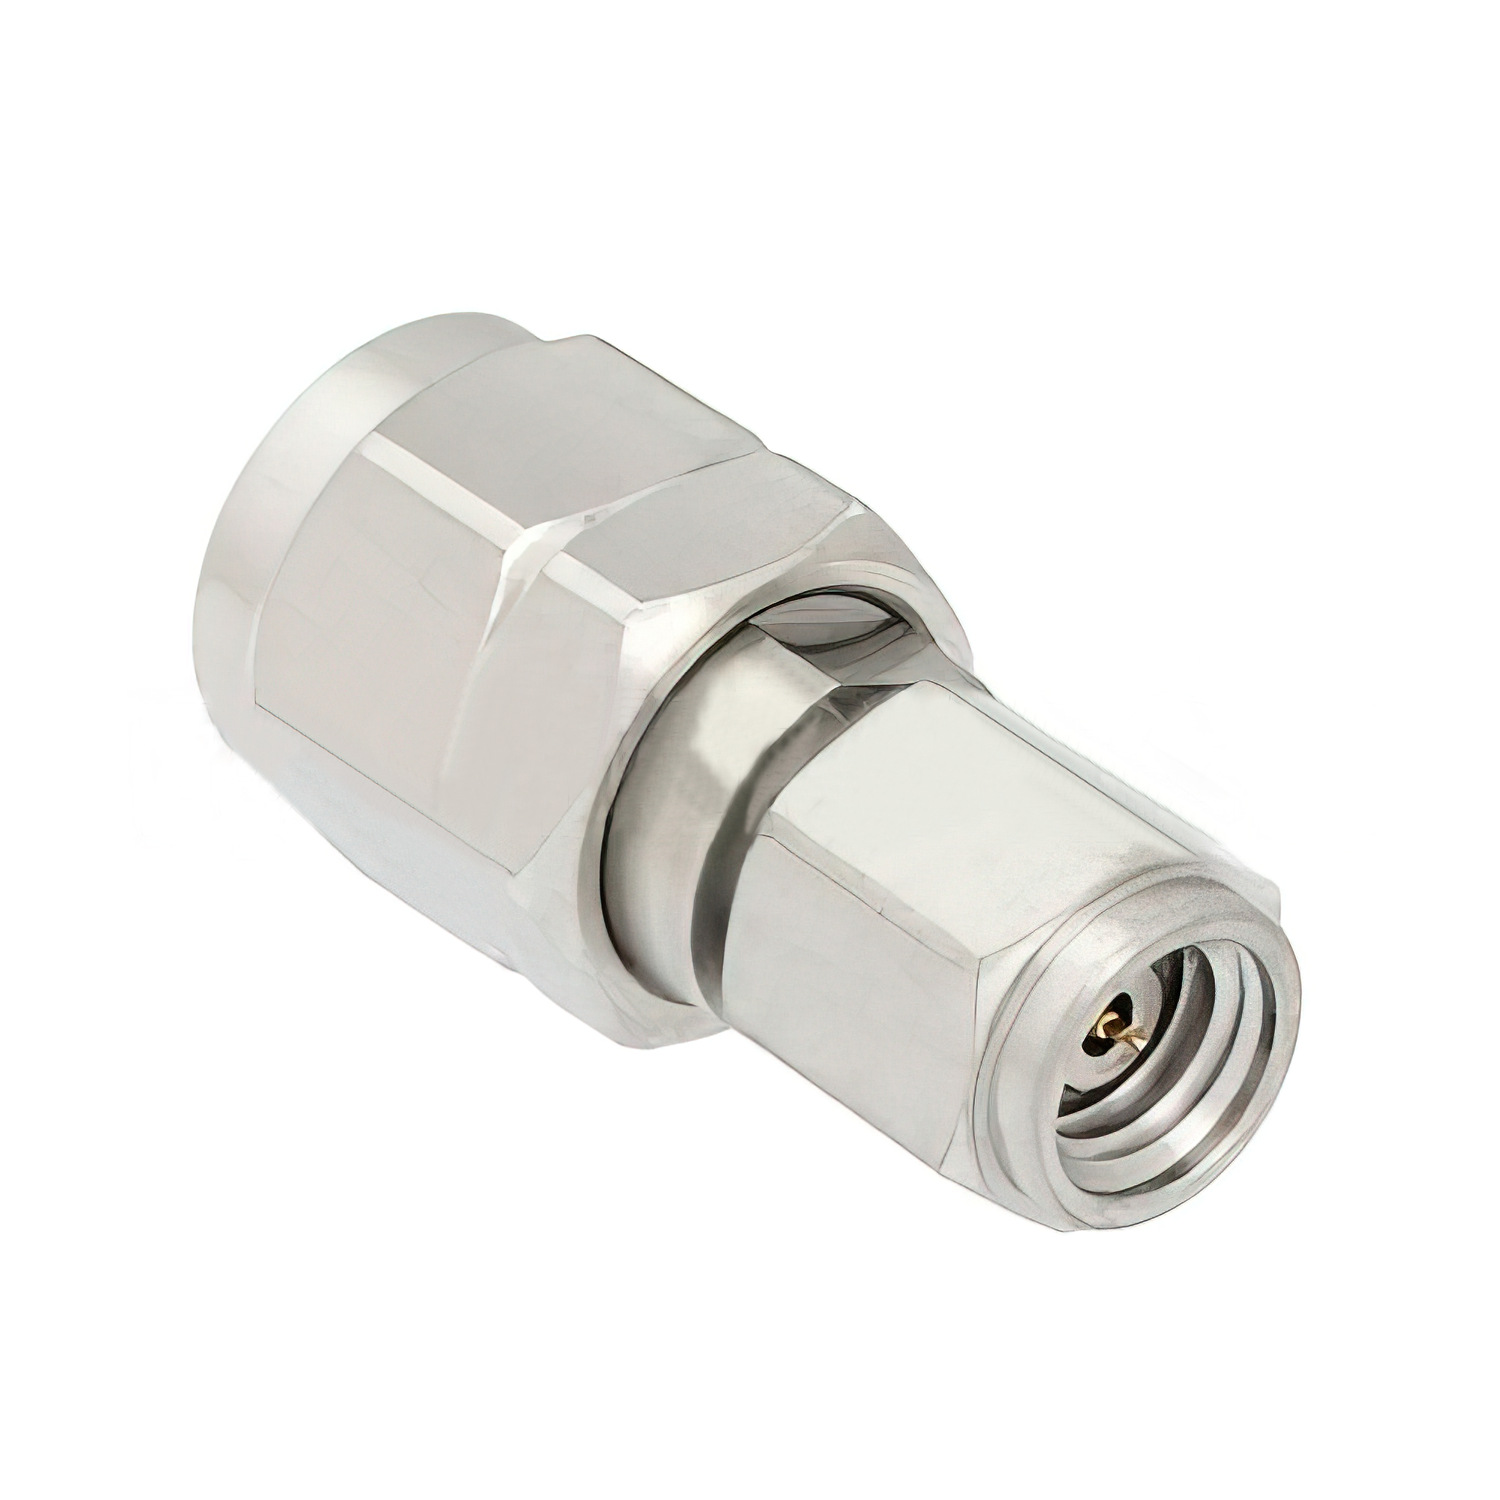 1.0mm male to 1.85mm male adapter1